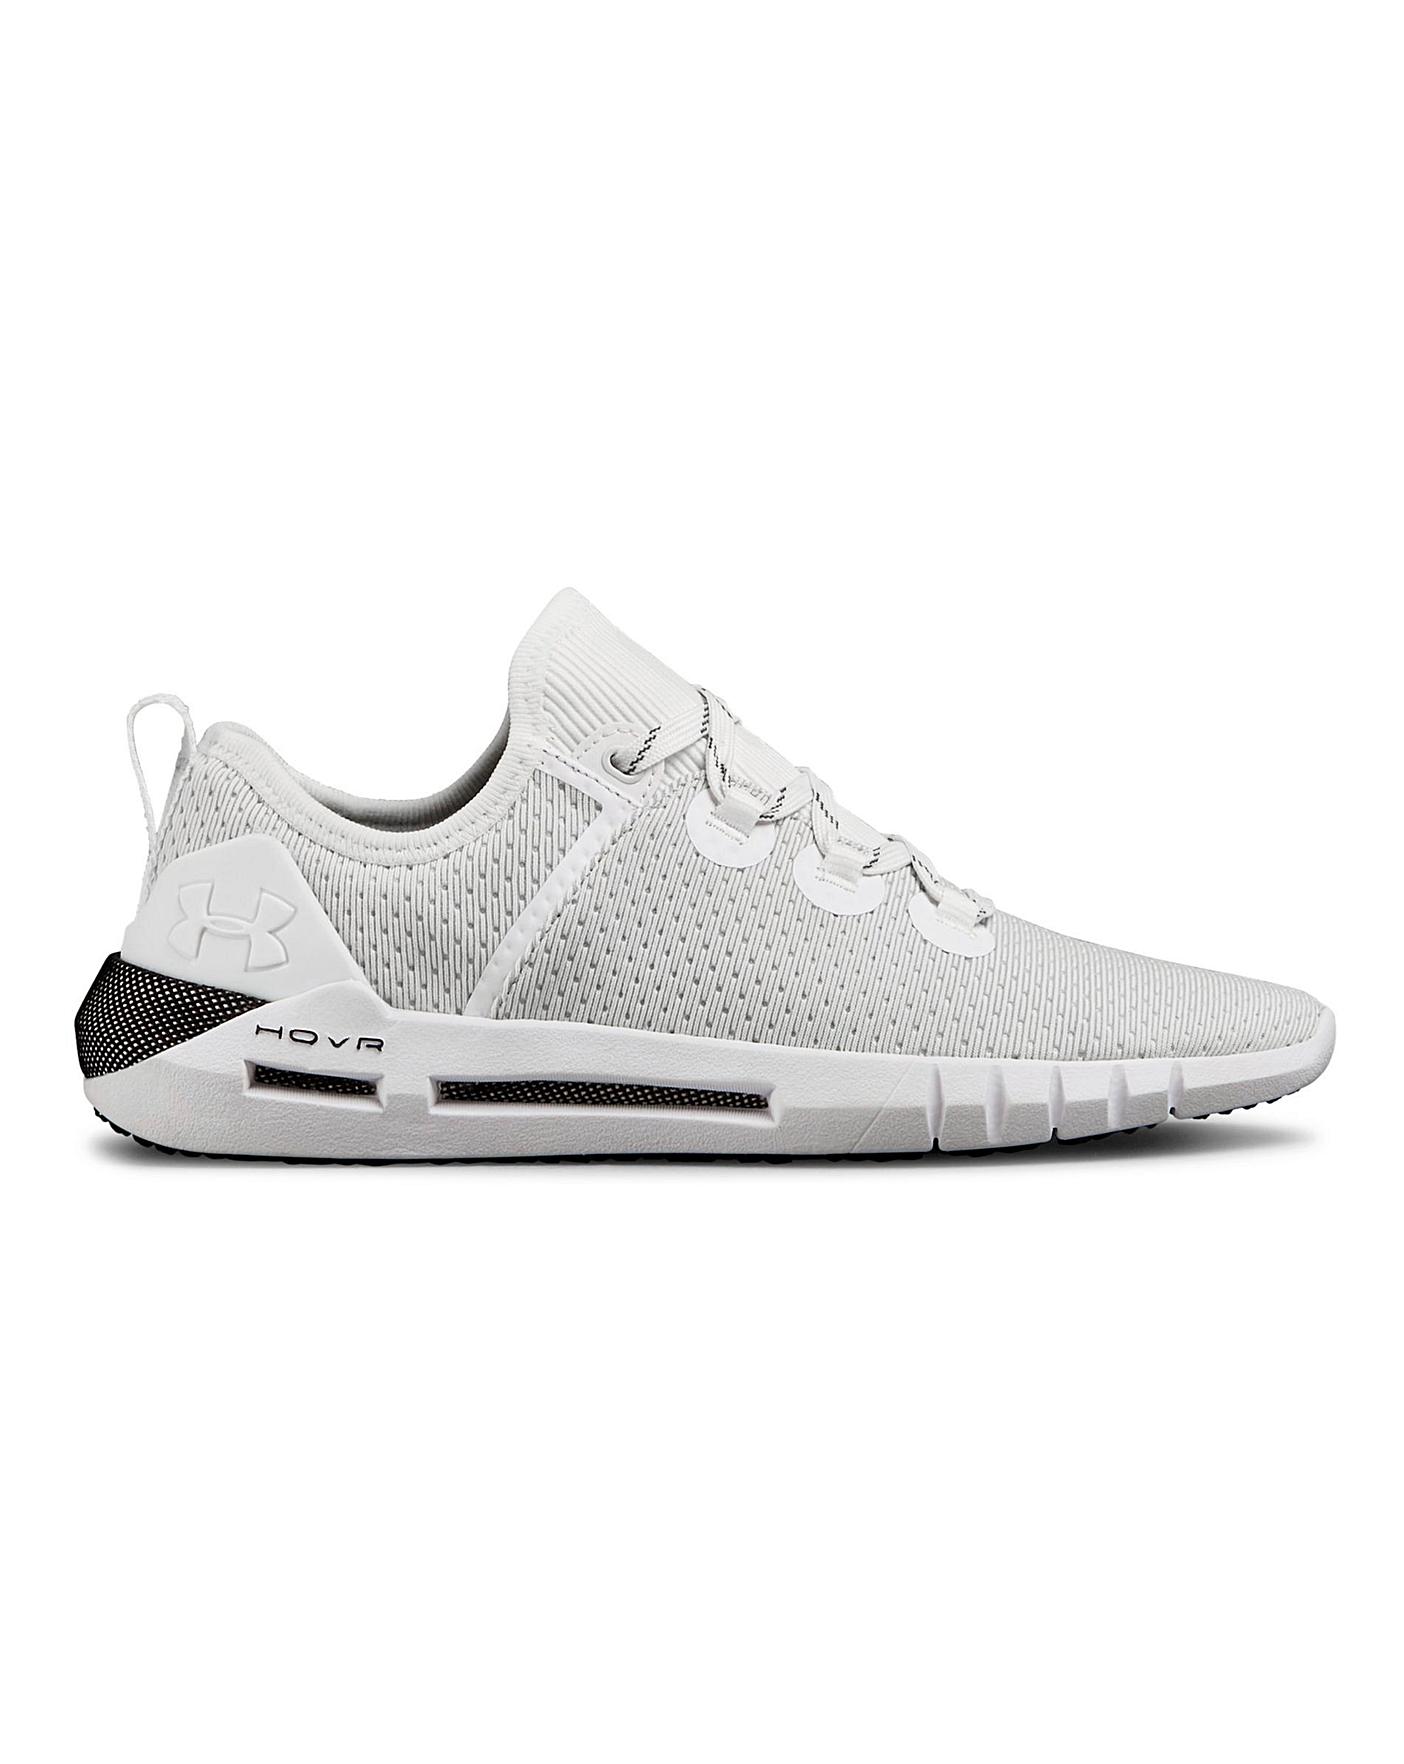 Under Armour Hovr Trainers | Simply Be